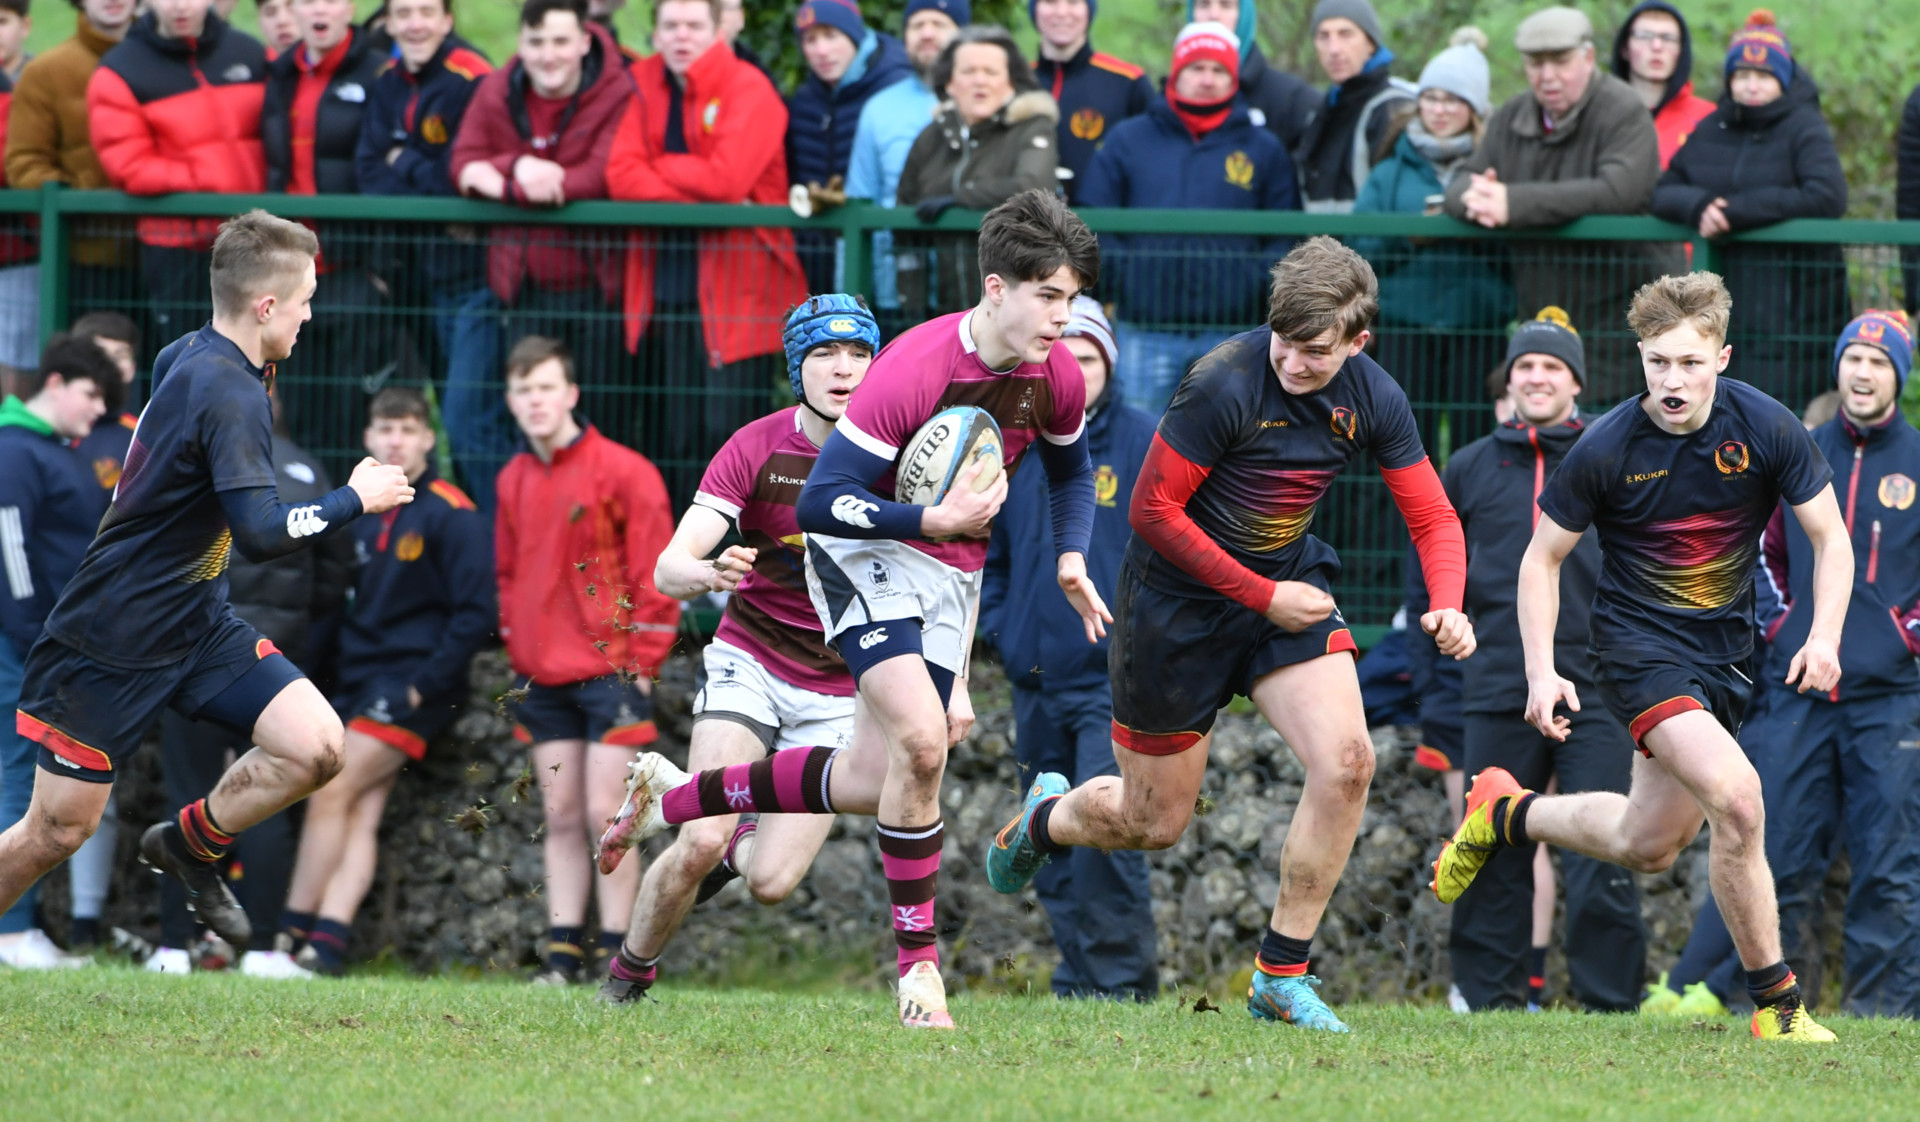 Dungannon power into last four as Omagh Academy suffer a knockout blow